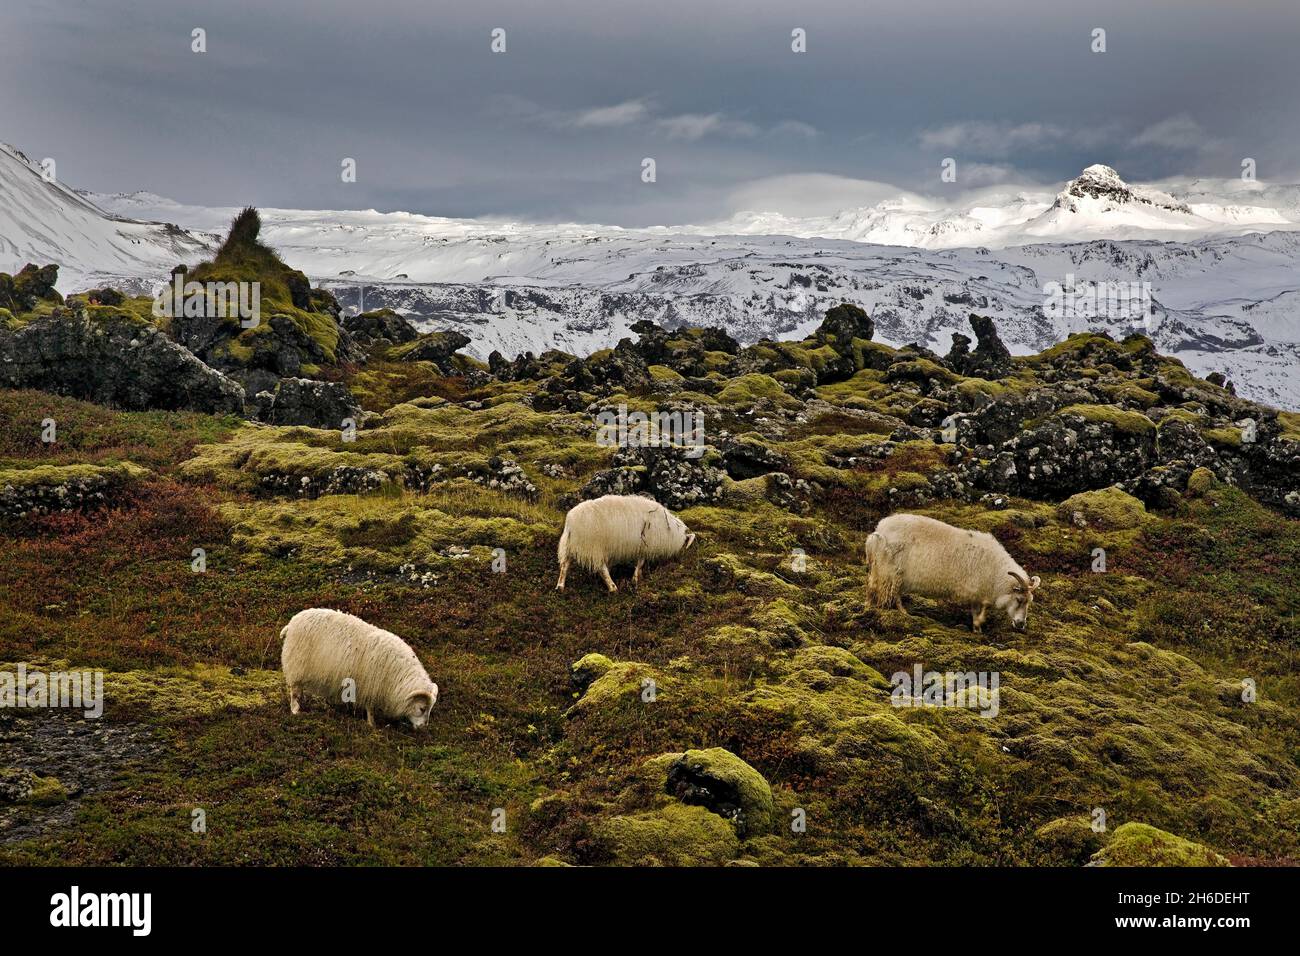 domestic sheep (Ovis ammon f. aries), three sheeps in front of mountain scenery with snow, Iceland, Snaefellsnes Stock Photo